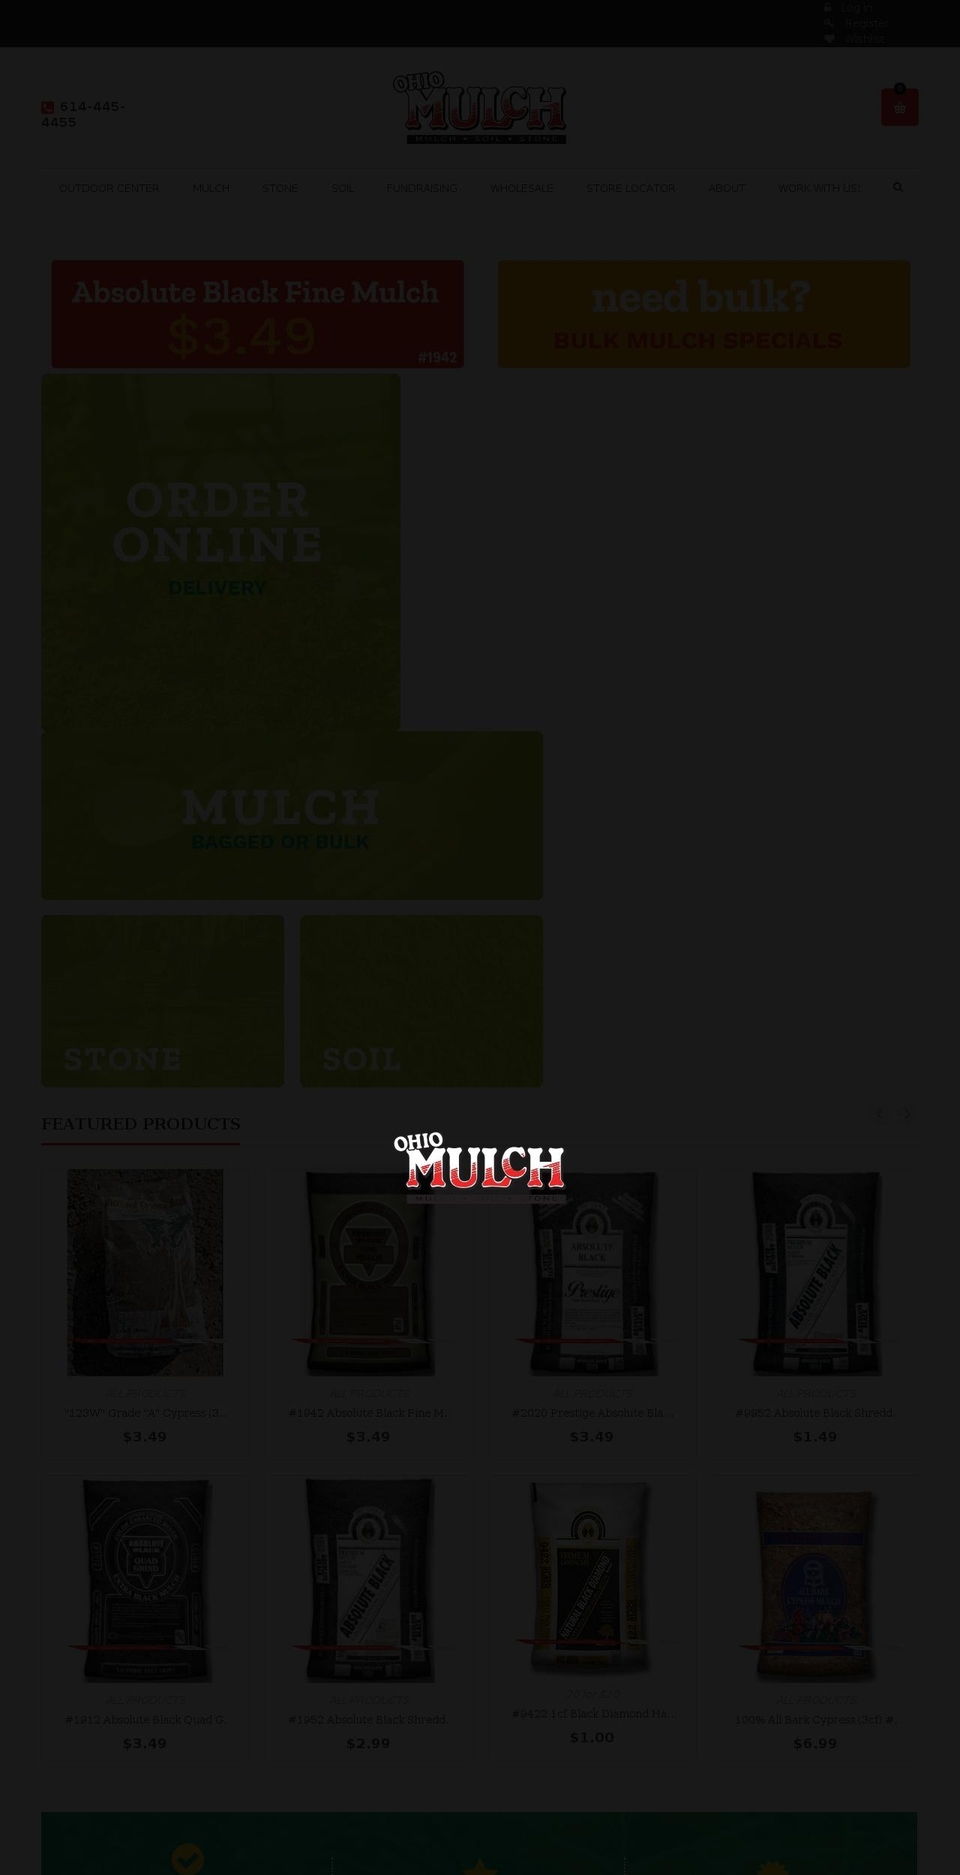 Ohio Mulch -- Supple Wholesale Installed Shopify theme site example ohiomulch.org